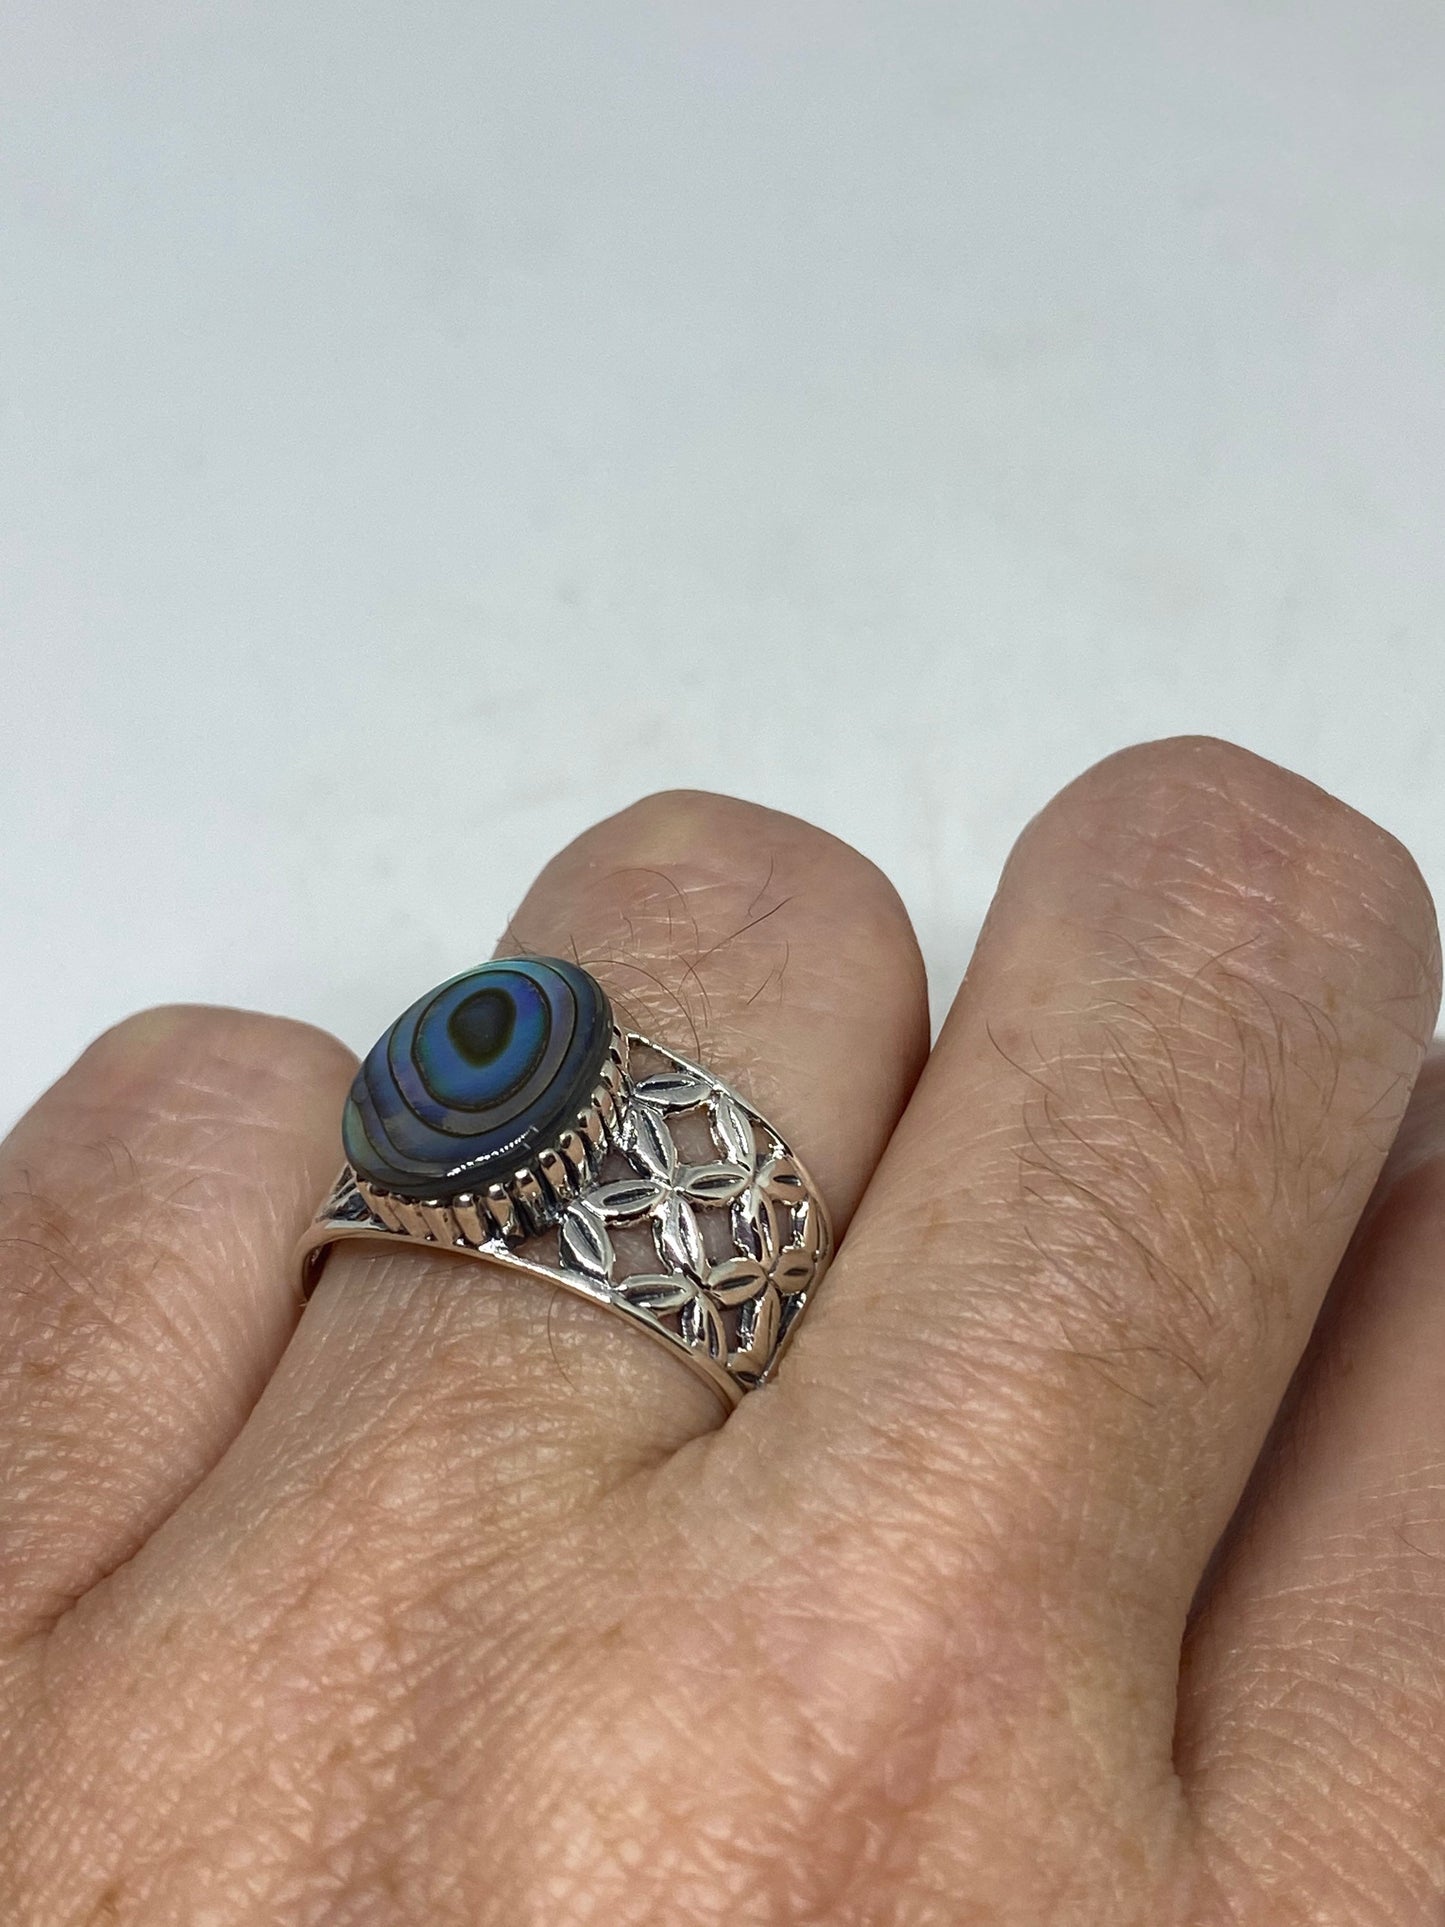 Antique Green Abalone Celtic Knot Filigree Sterling Silver Ring